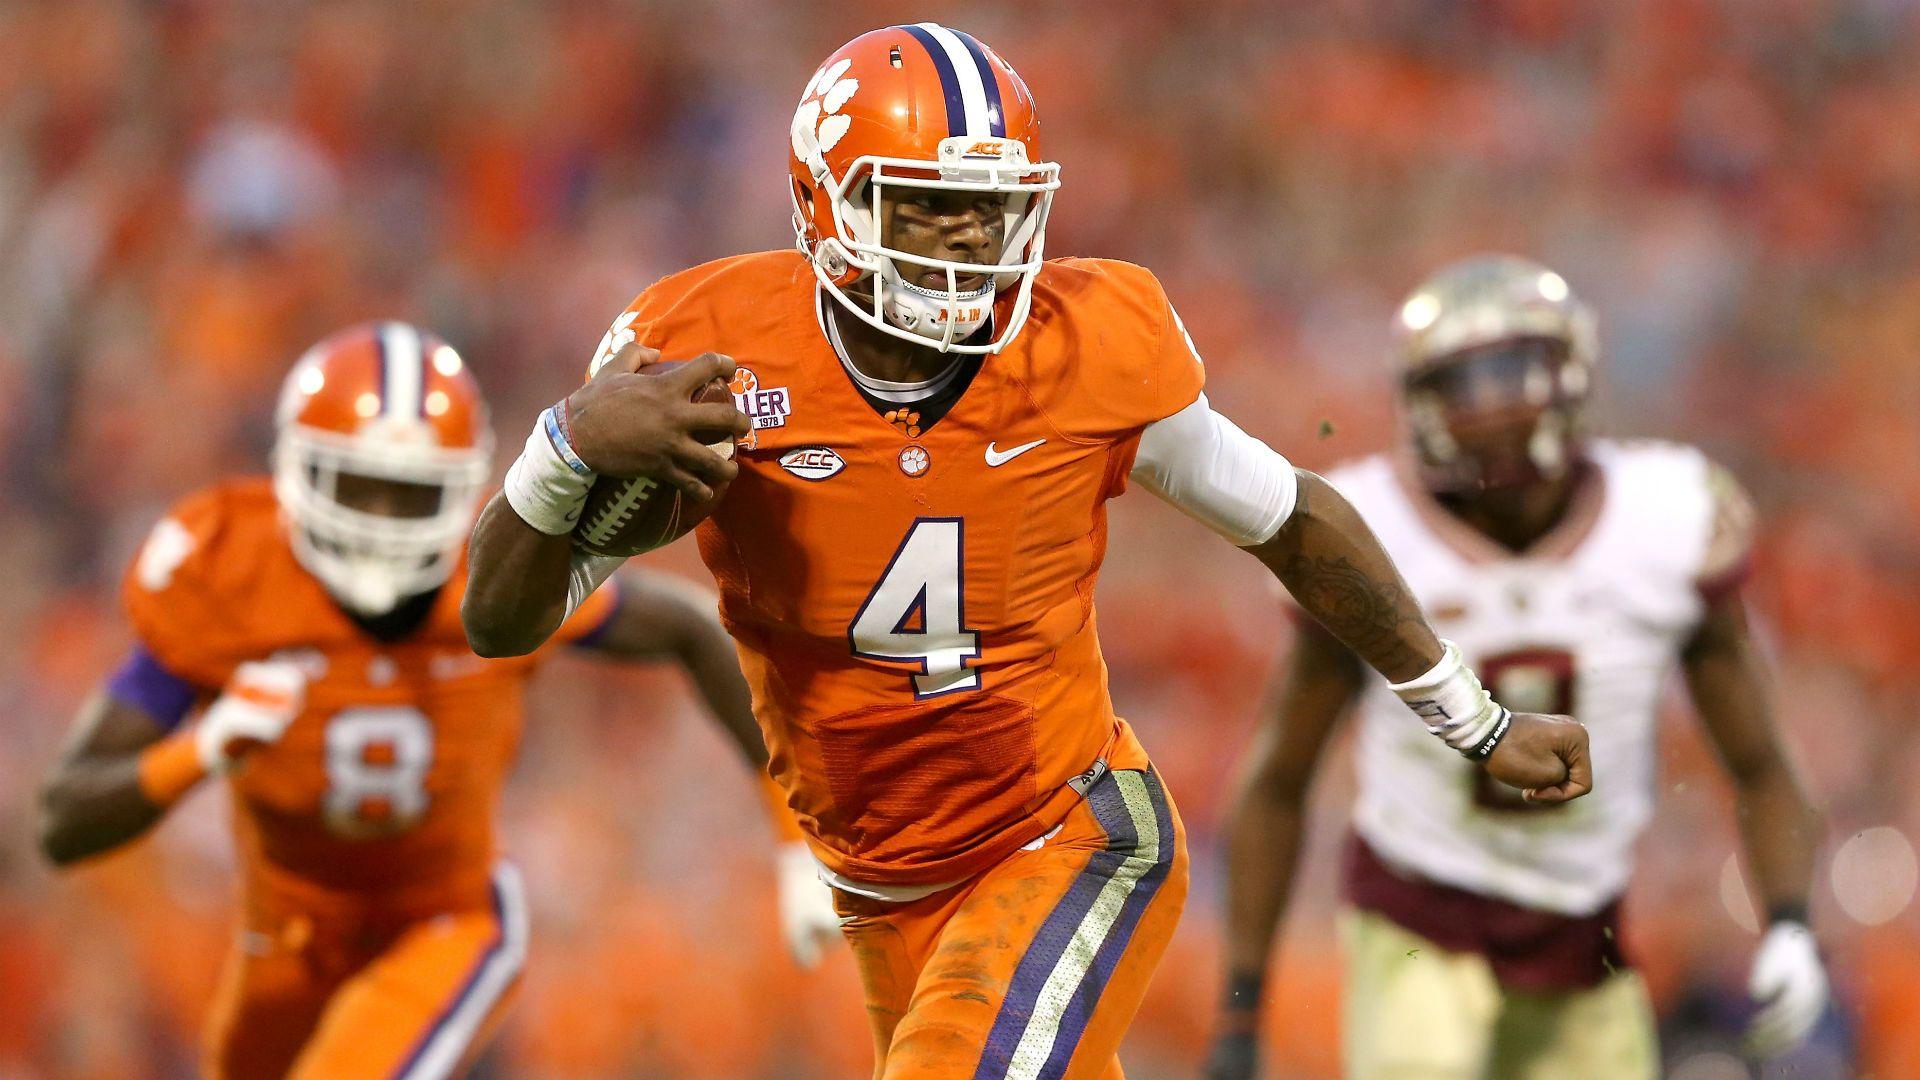 With game on the line, No. 1 Clemson leans on Deshaun Watson